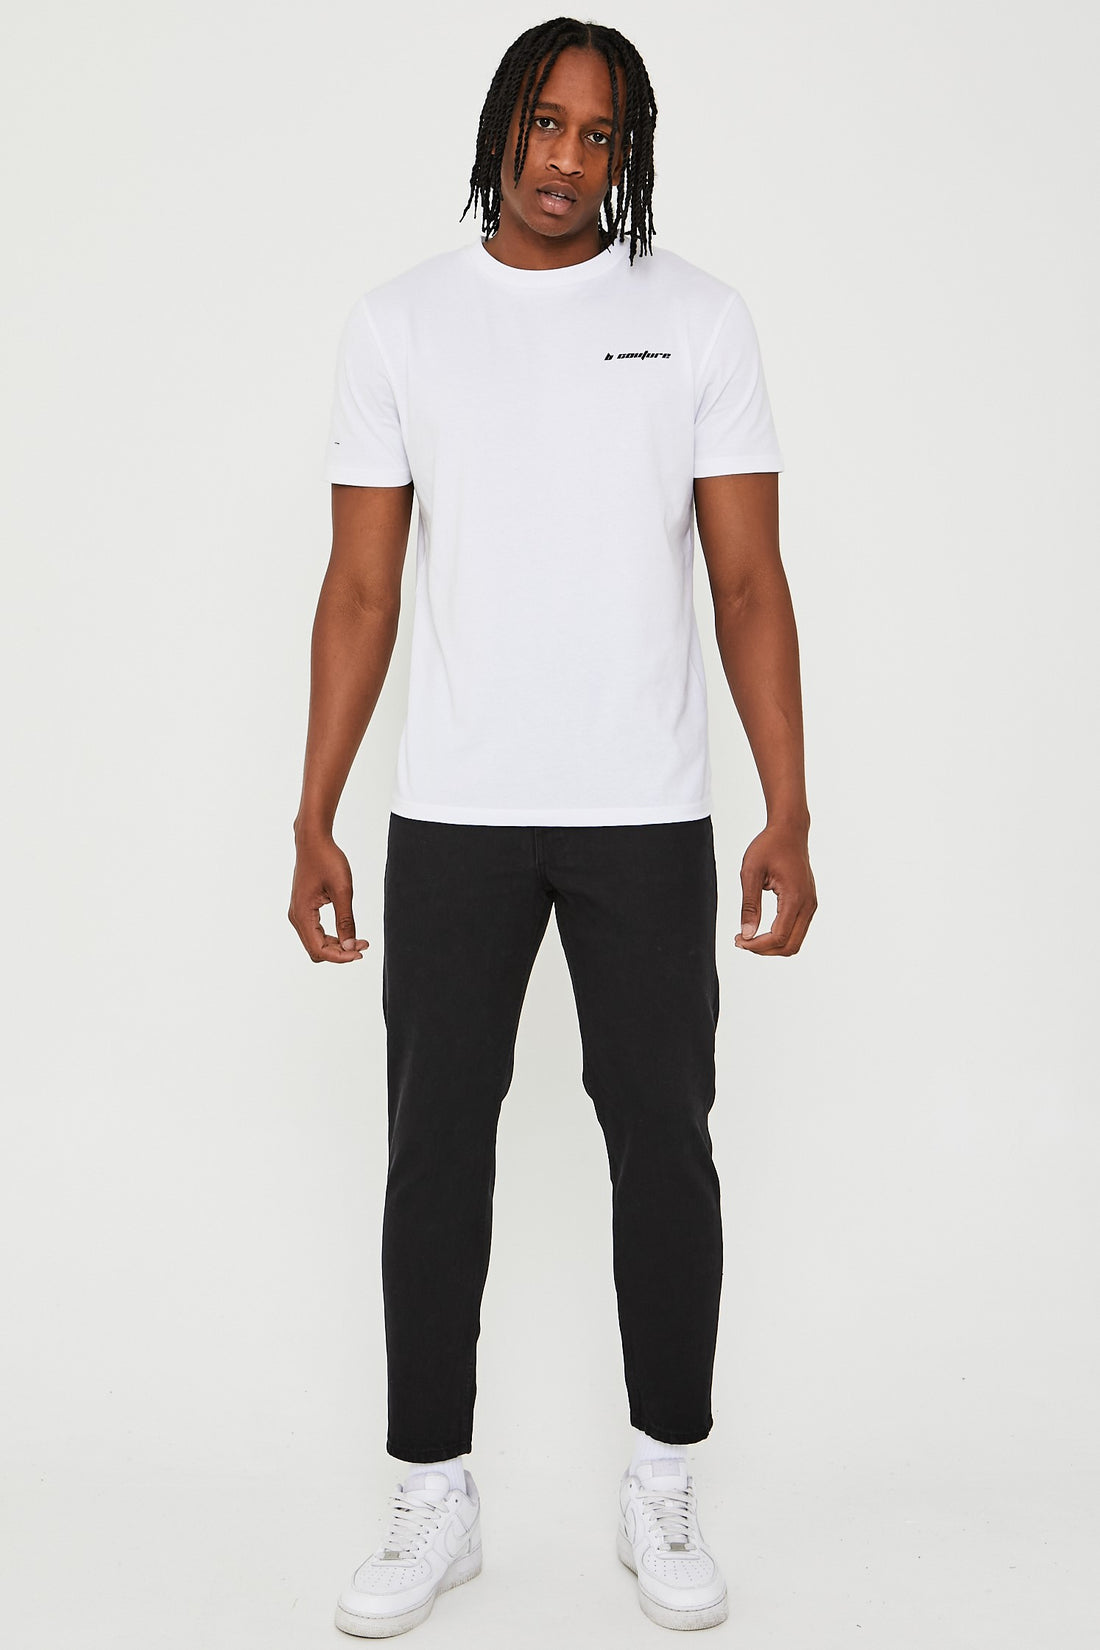 Just Organic Tapered Jeans - Black